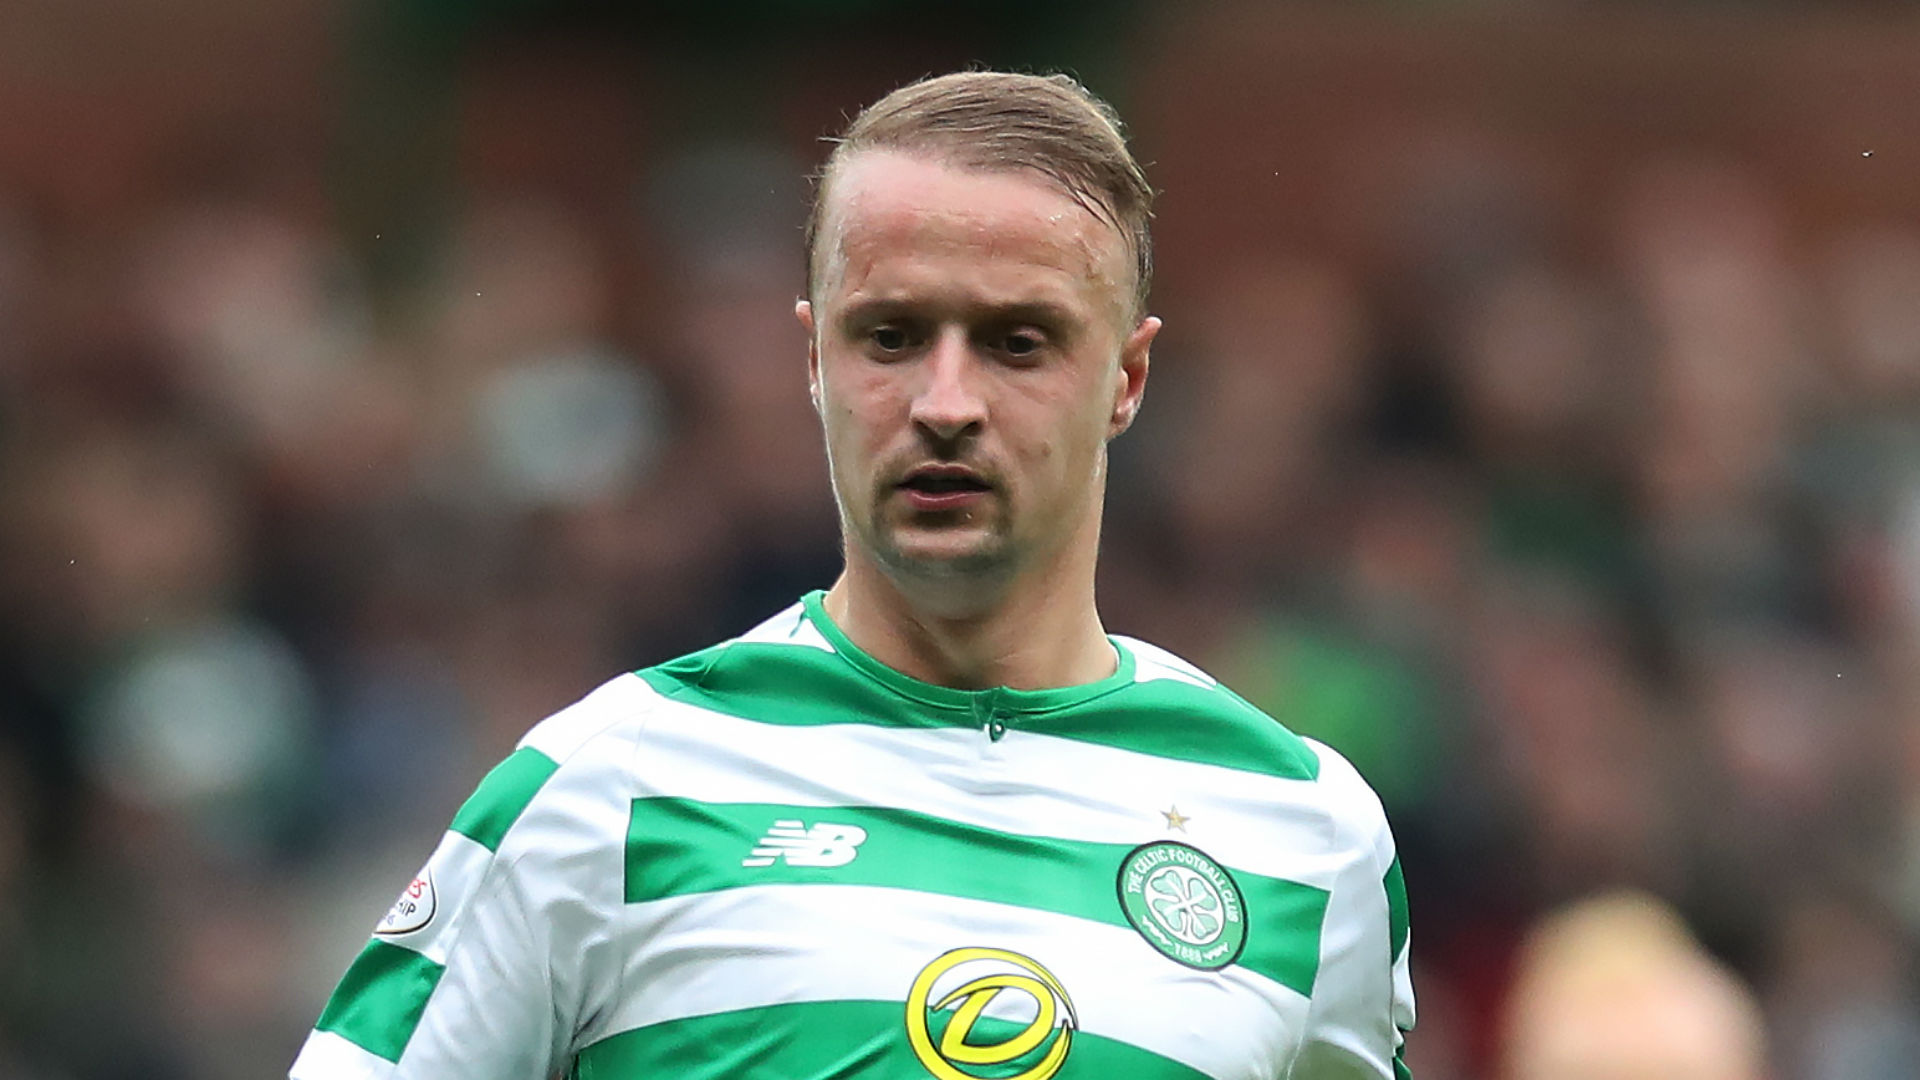 Brendan Rodgers says Celtic will offer Leigh Griffiths their full support as he deals with off-field issues.